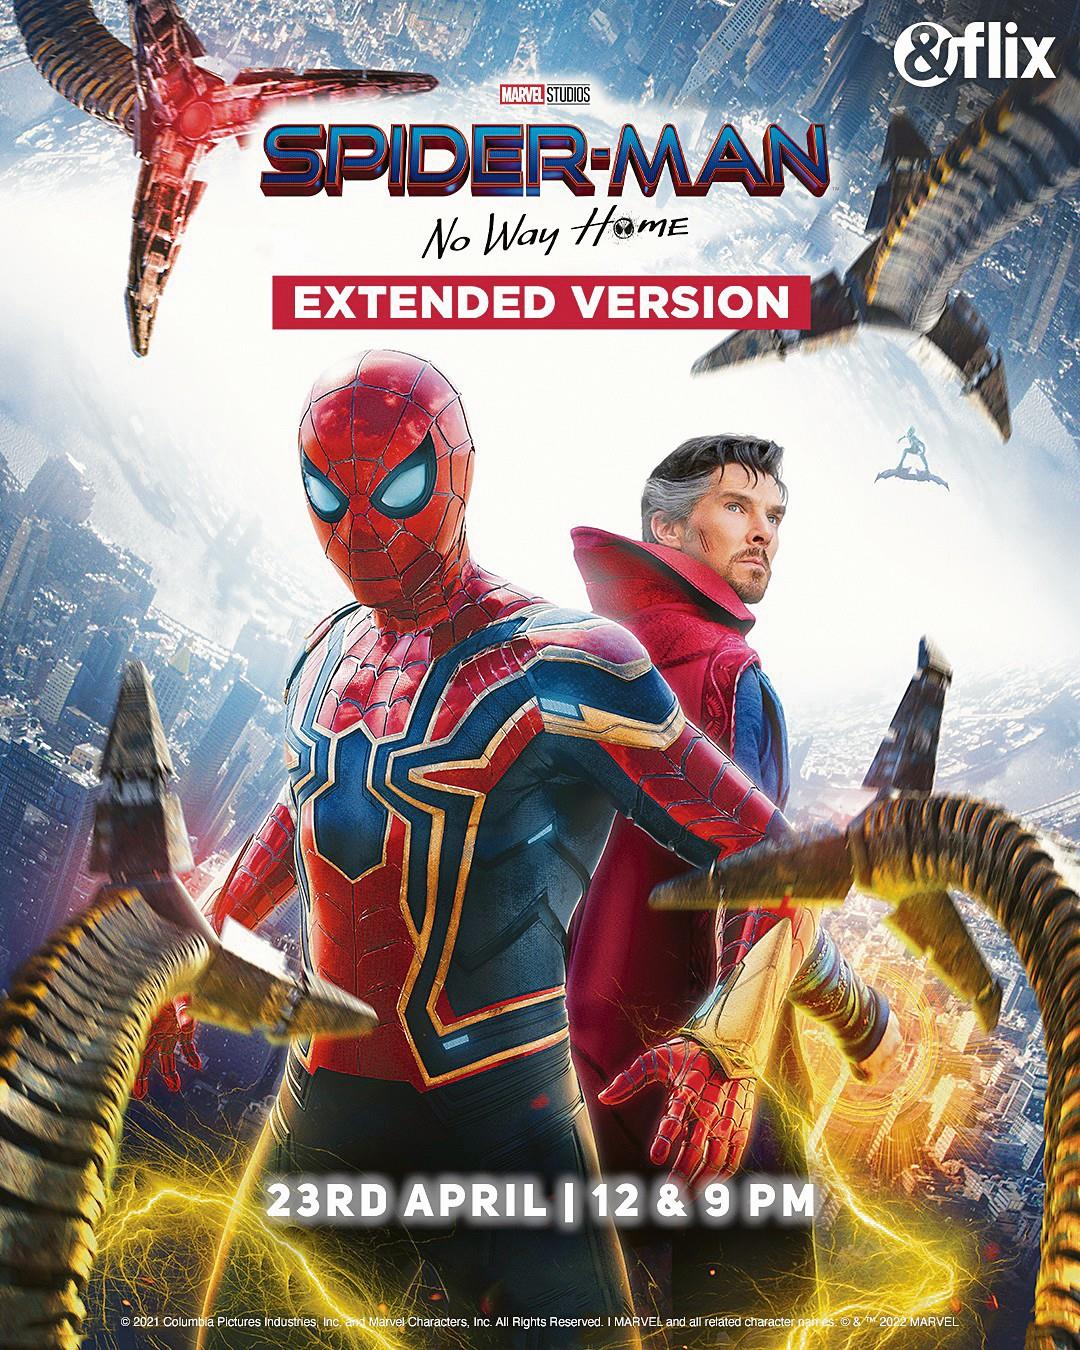 &flix to stream Spiderman: No Way Home: Extended Cut on April 23